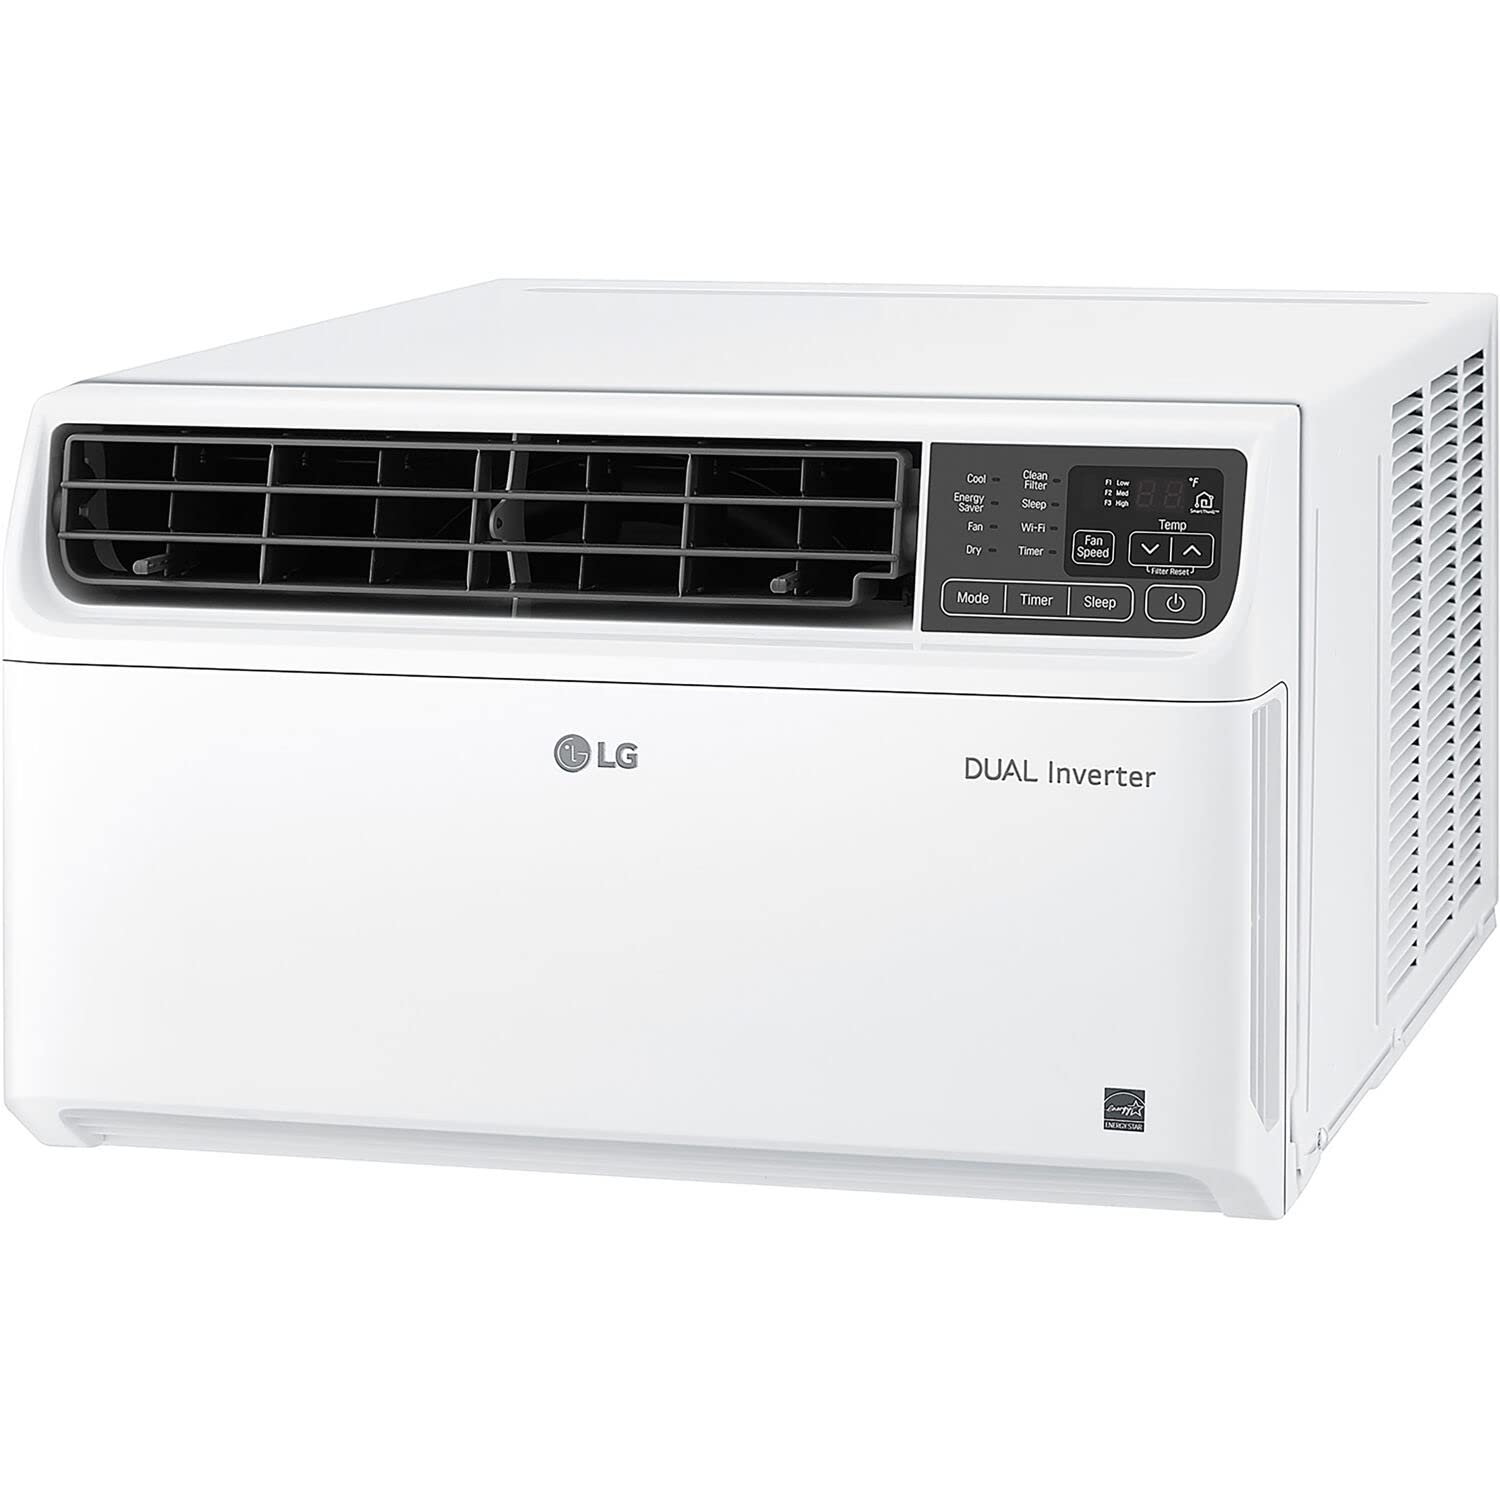 LG 8,000 BTU Dual Inverter Smart Window Air Conditioner, Cools 340 Sq. Ft., Ultra Quiet Operation, Up to 35% More Energy Savings, Energy Star, works with LG ThinQ, $299.99 @Amazon